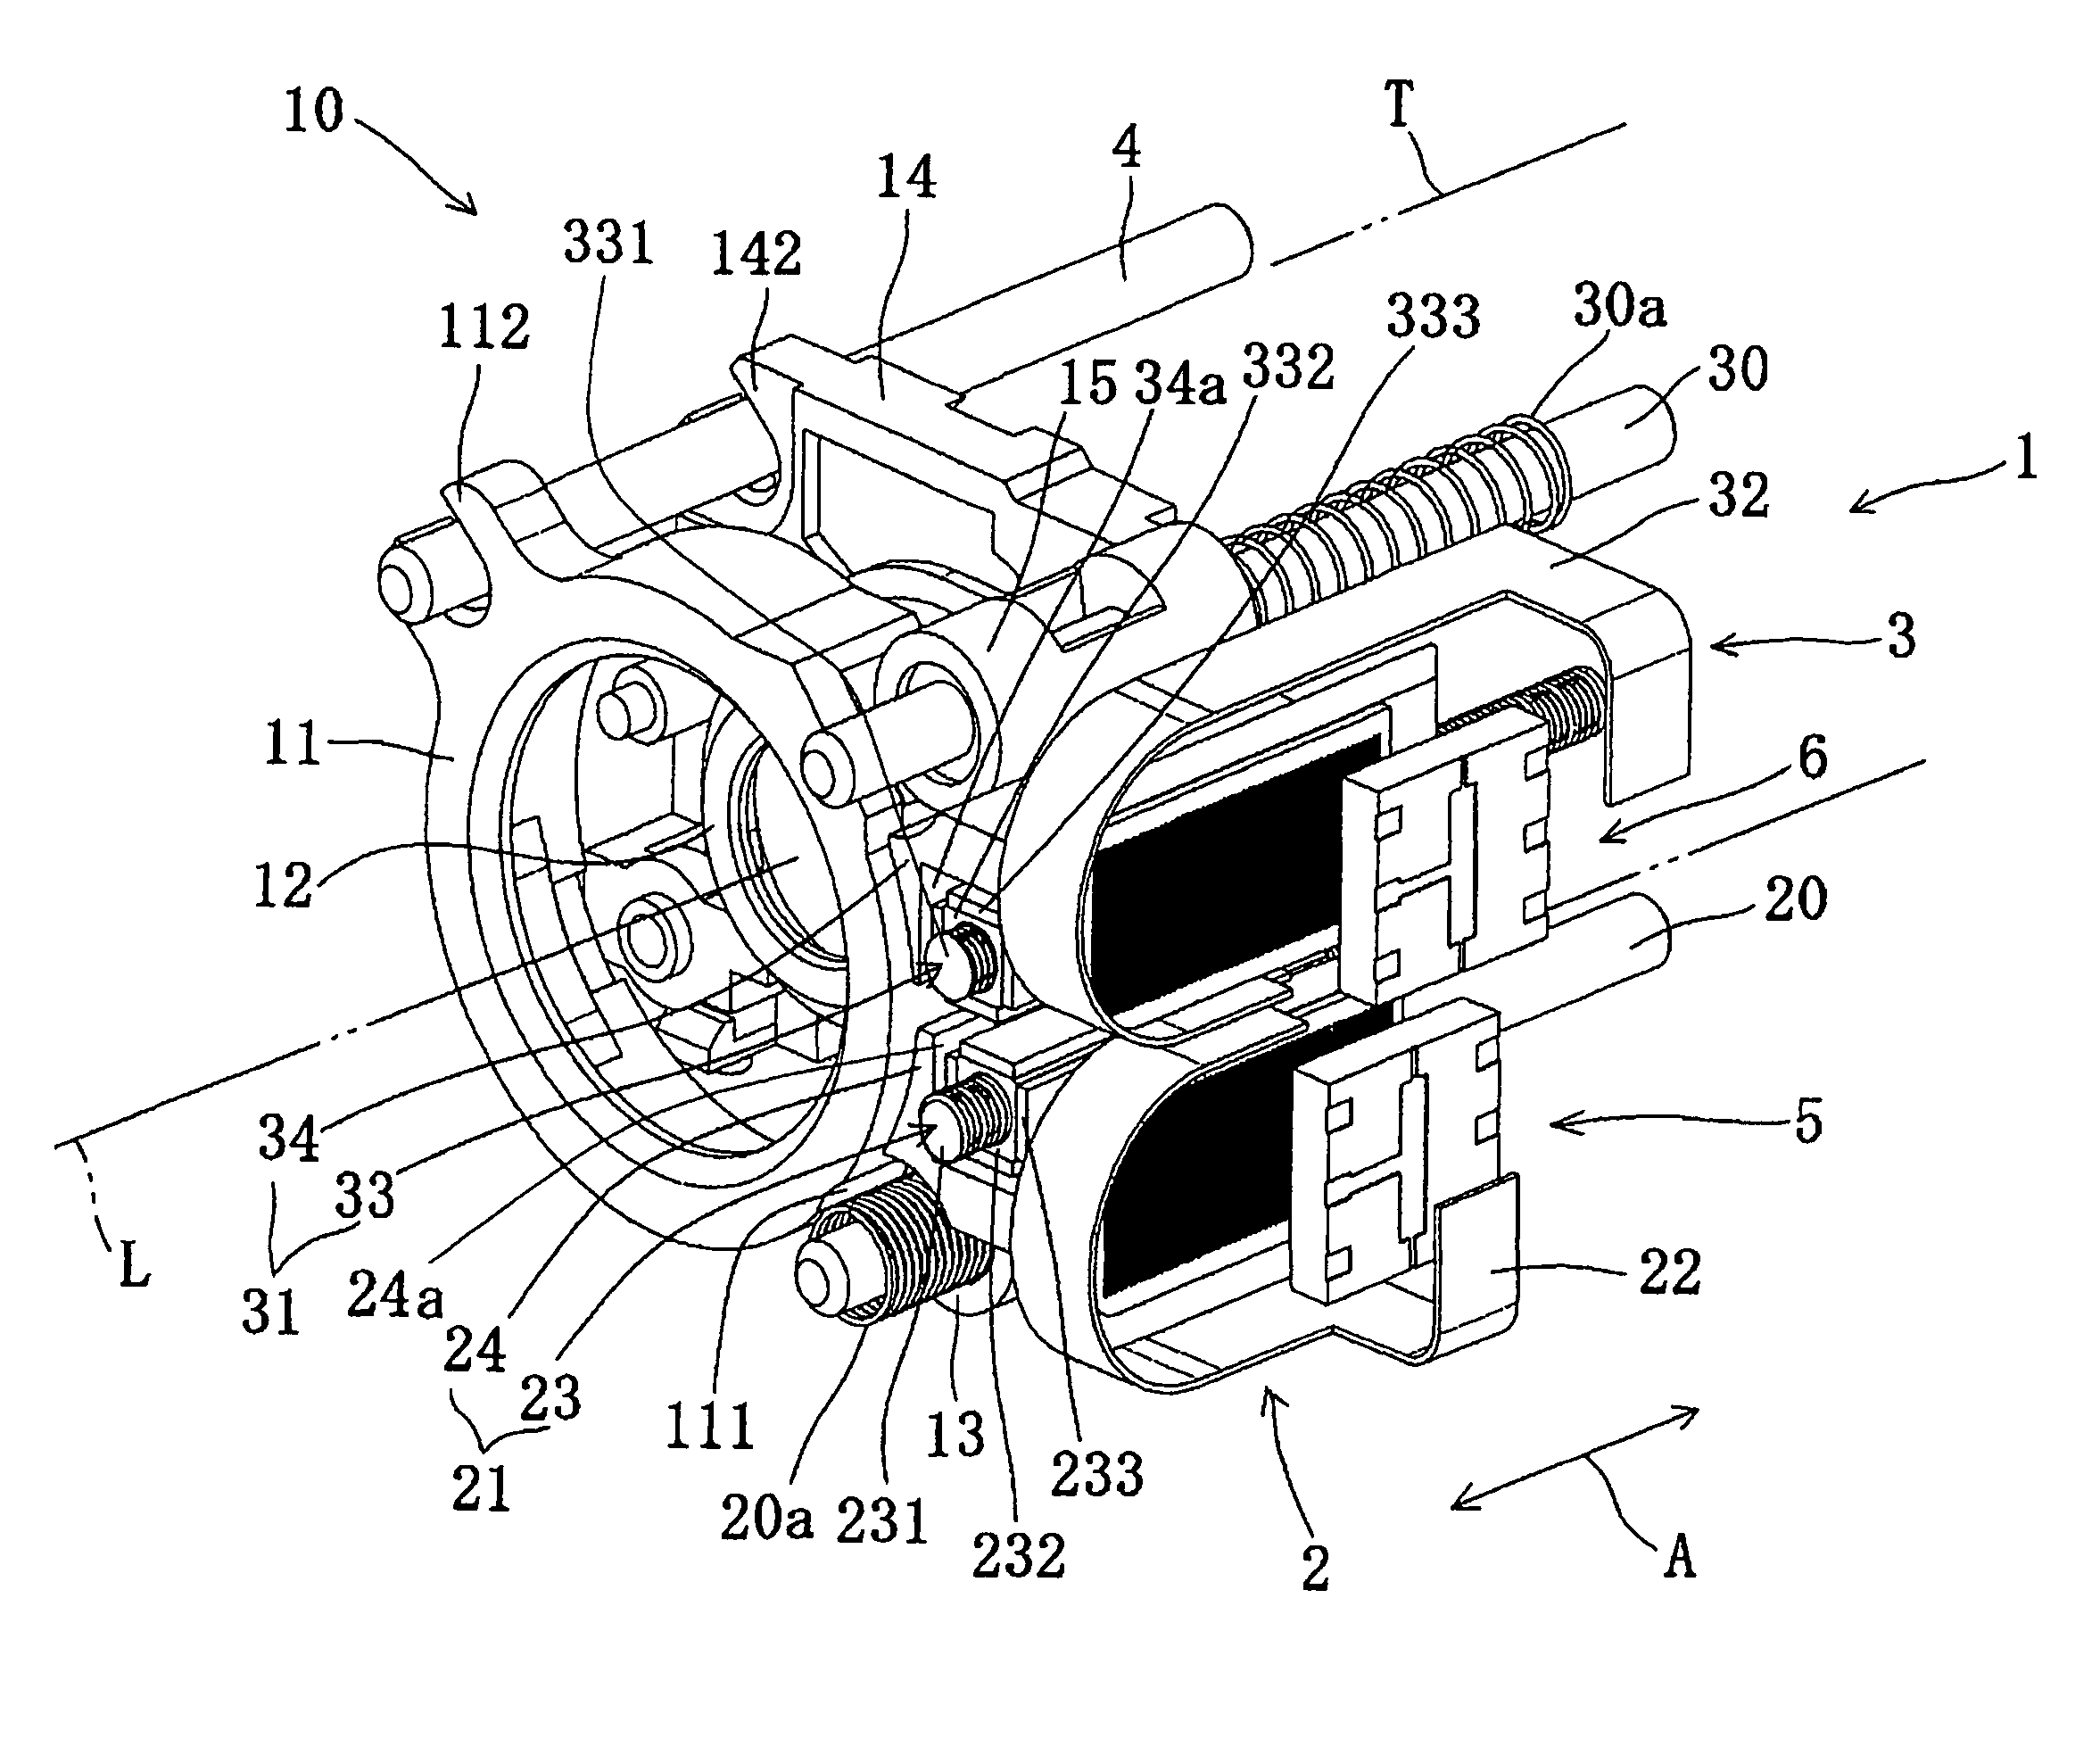 Sliding device composed of combined structure of screw bolt and nut